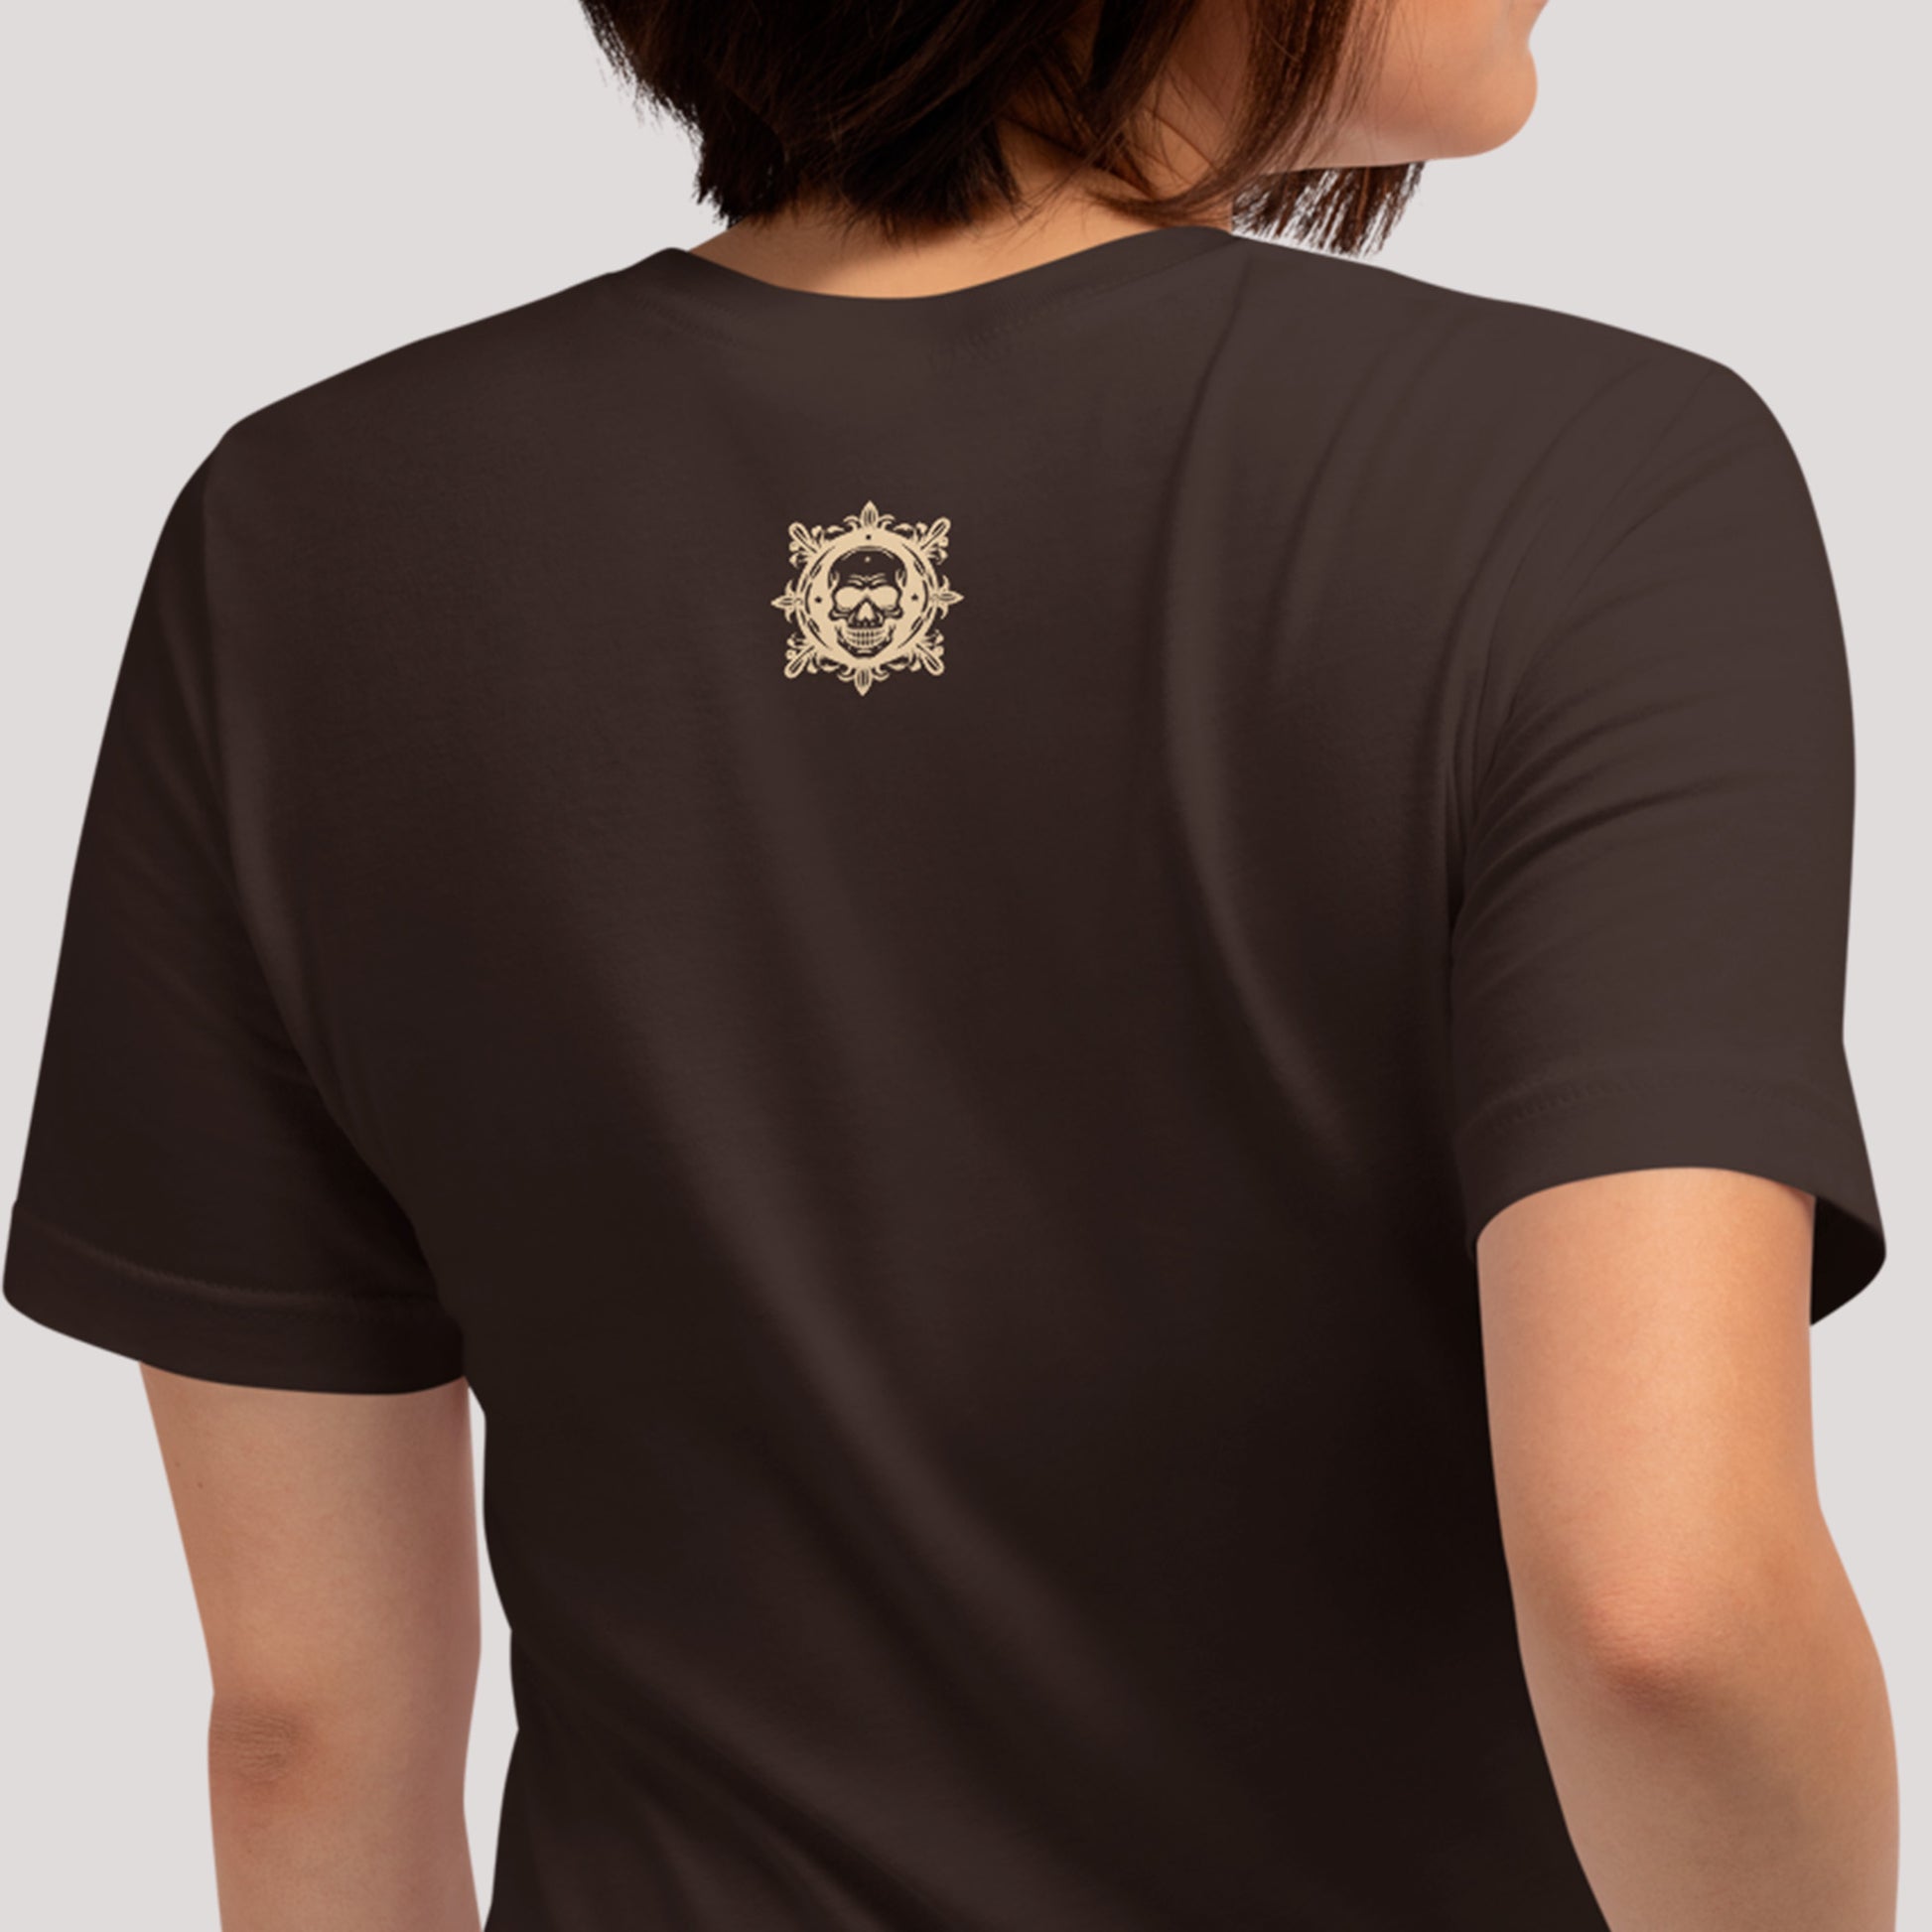 back view of model wearing brown Coiled Grace Unisex t-shirt